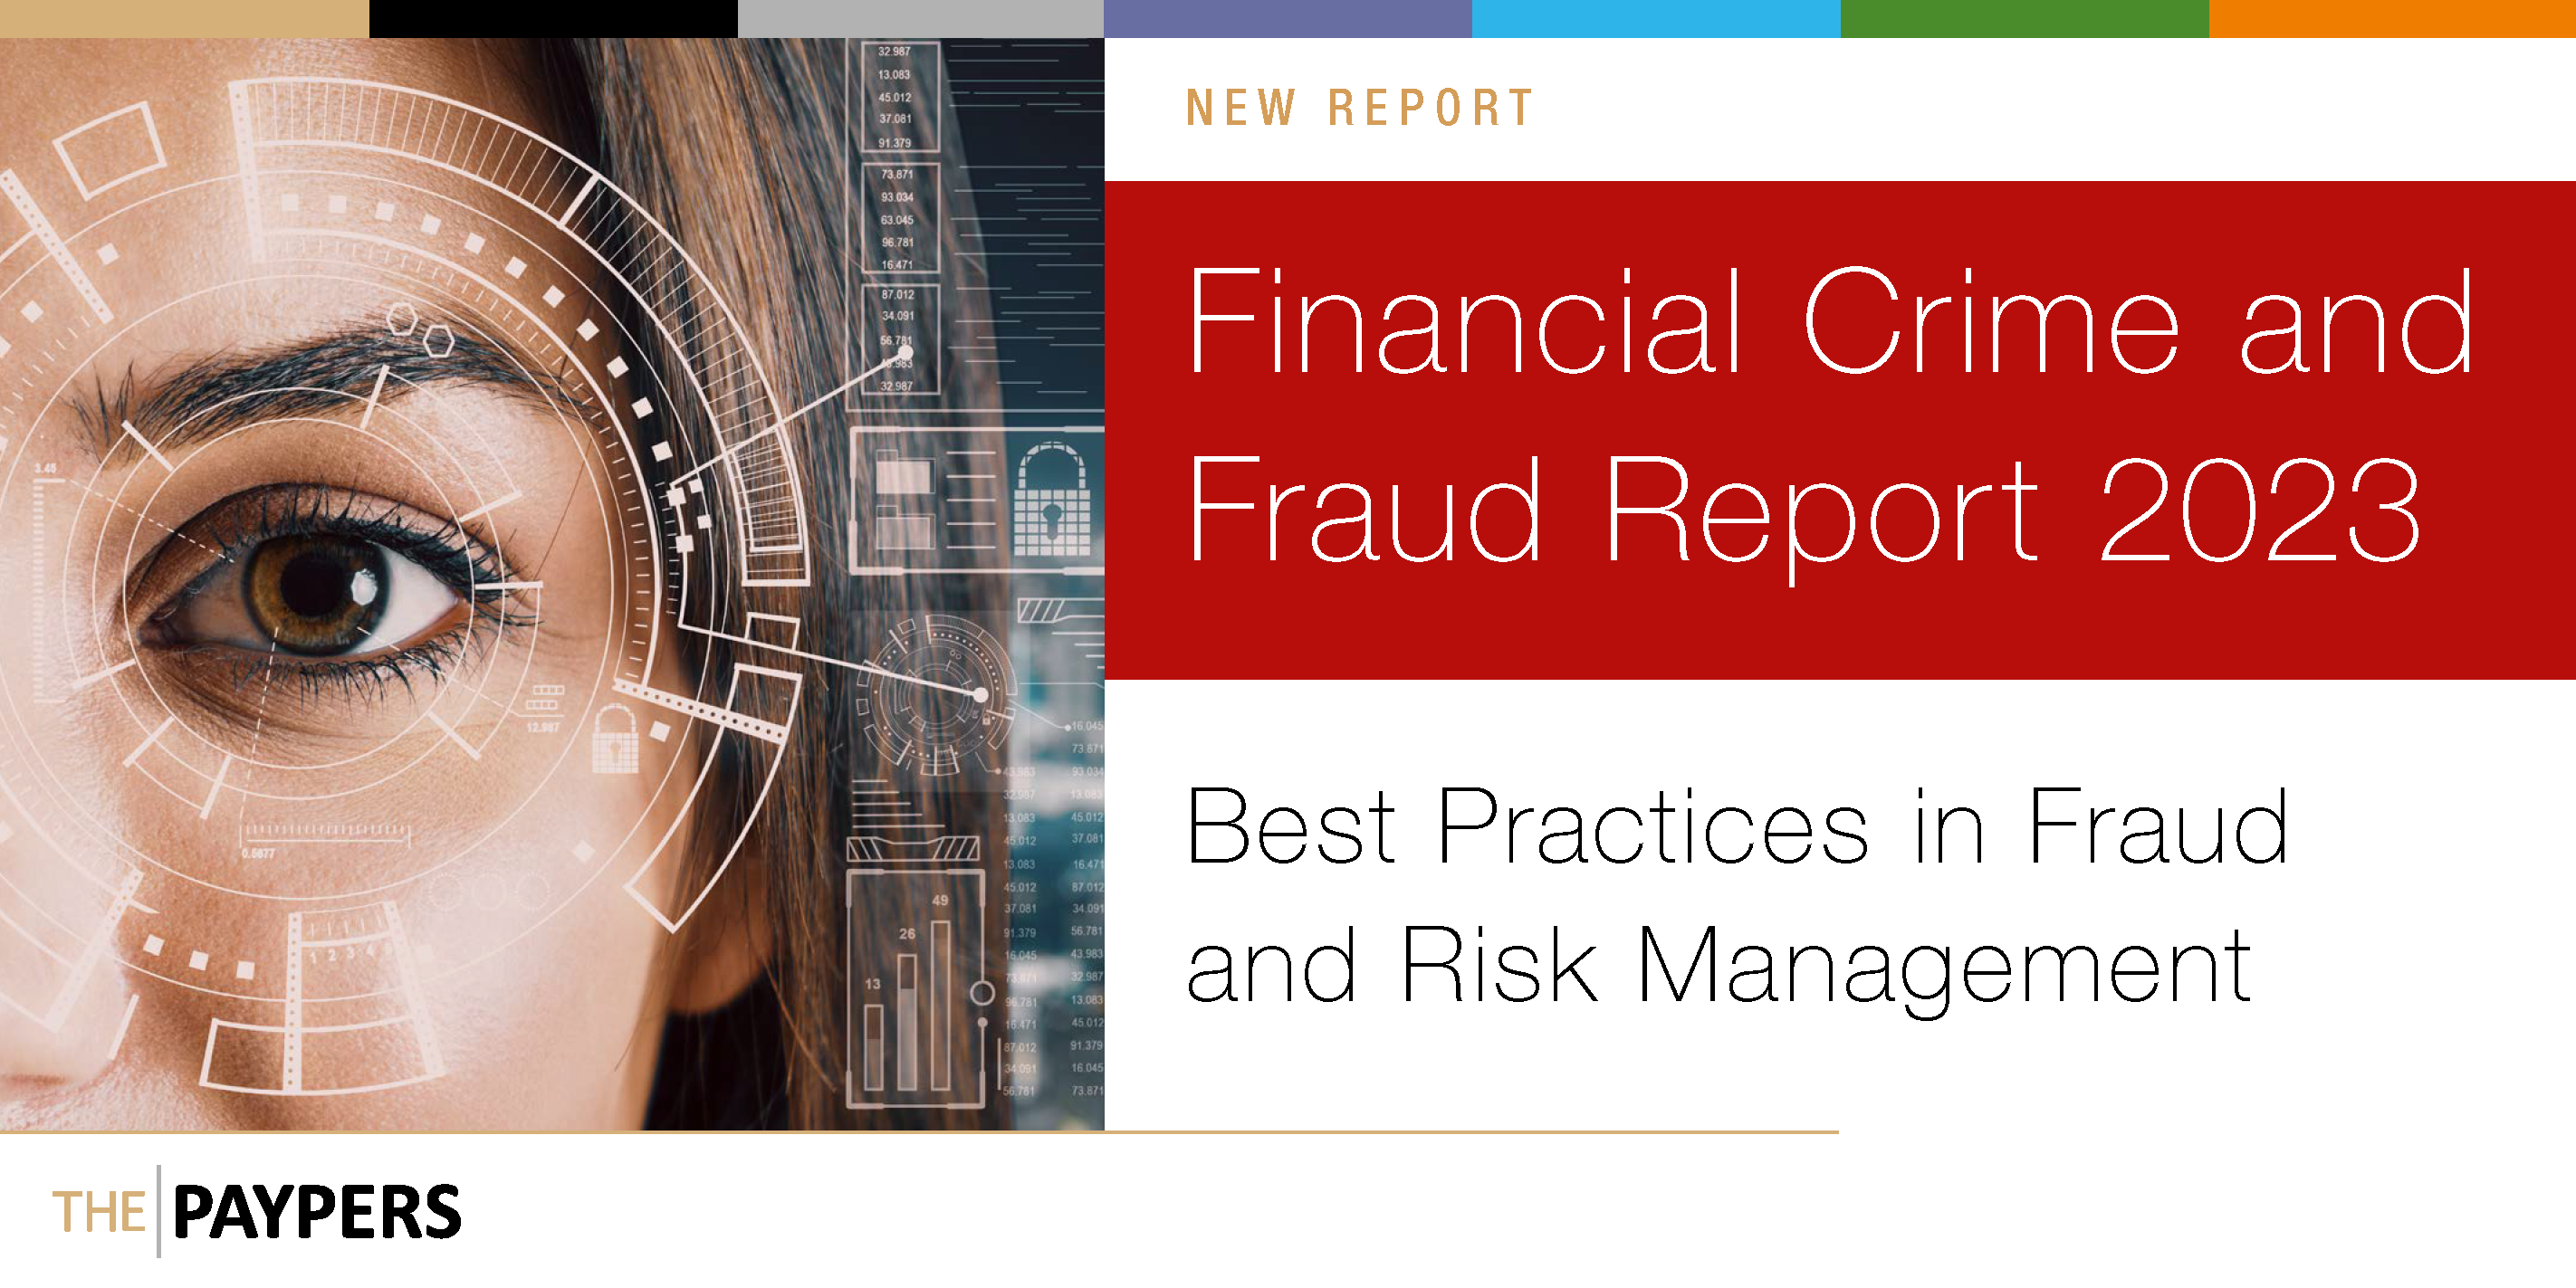 The Paypers, the provider of news and insights in the financial industry, has announced the launch of the Financial Crime and Fraud Report 2023. 